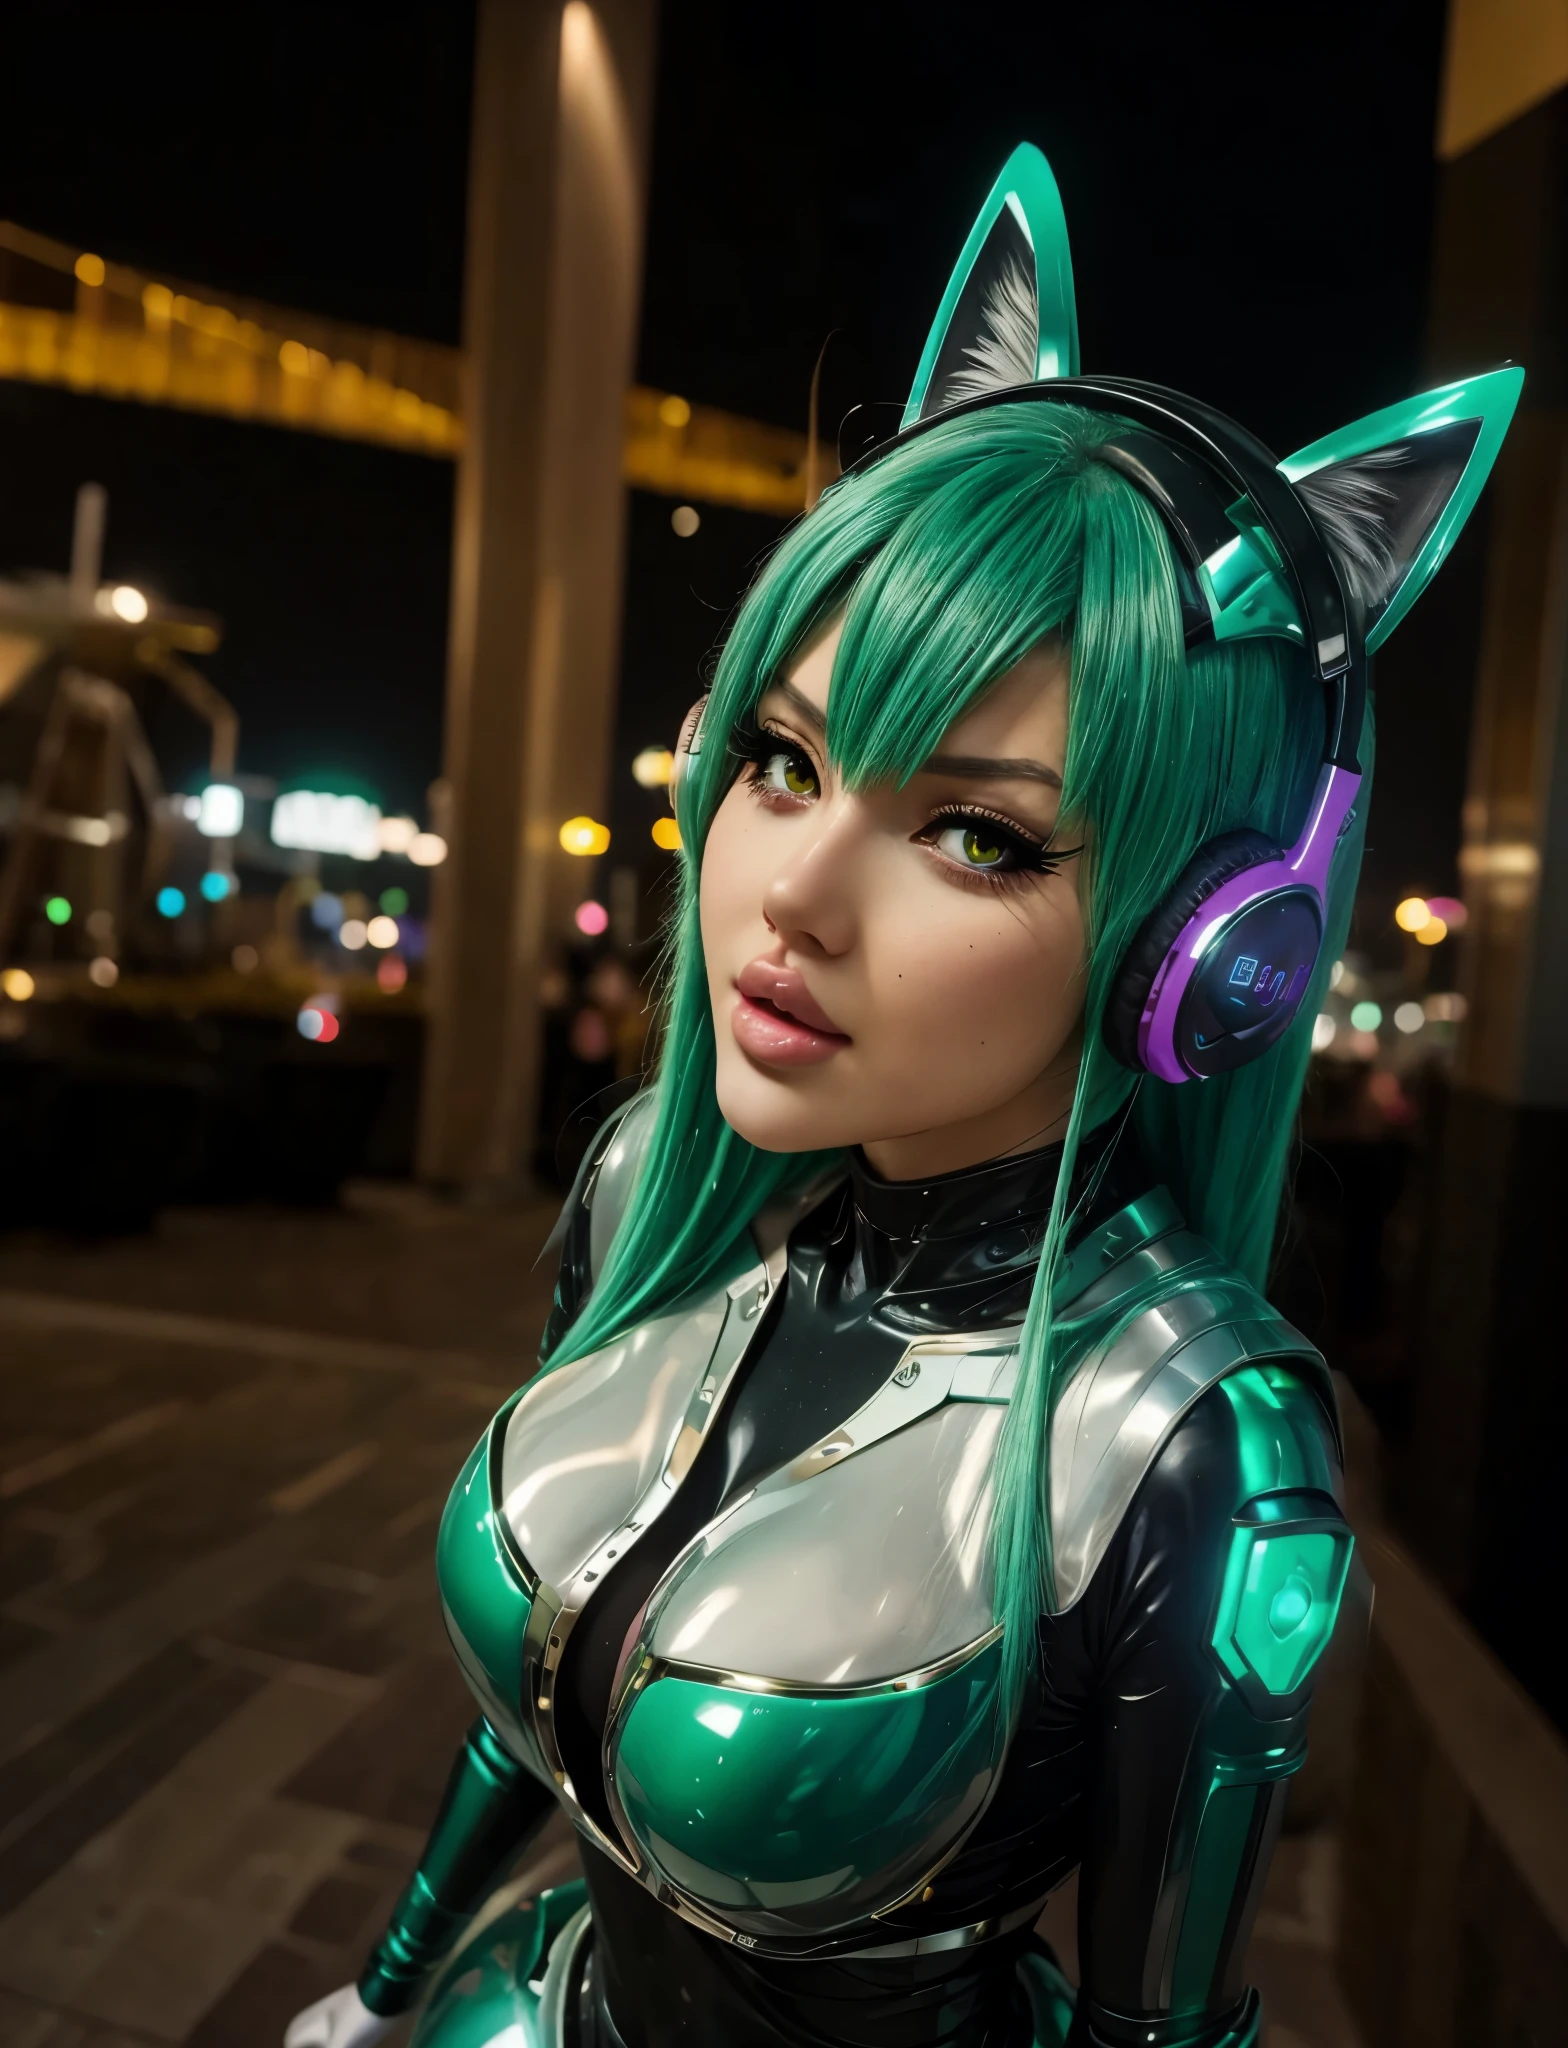 there is a woman with green hair and headphones, metal cat ears and glowing eyes, cosplay de anime, tatsumaki from one punch man, anime catgirl, anime style mixed with fujifilm, nekomimi, digital green fox, professional cosplay, cosplay de  anime, woman with cat ears, wearing cat ear headphones, bright cyberpunk glow, foto de cosplay, tatsumaki